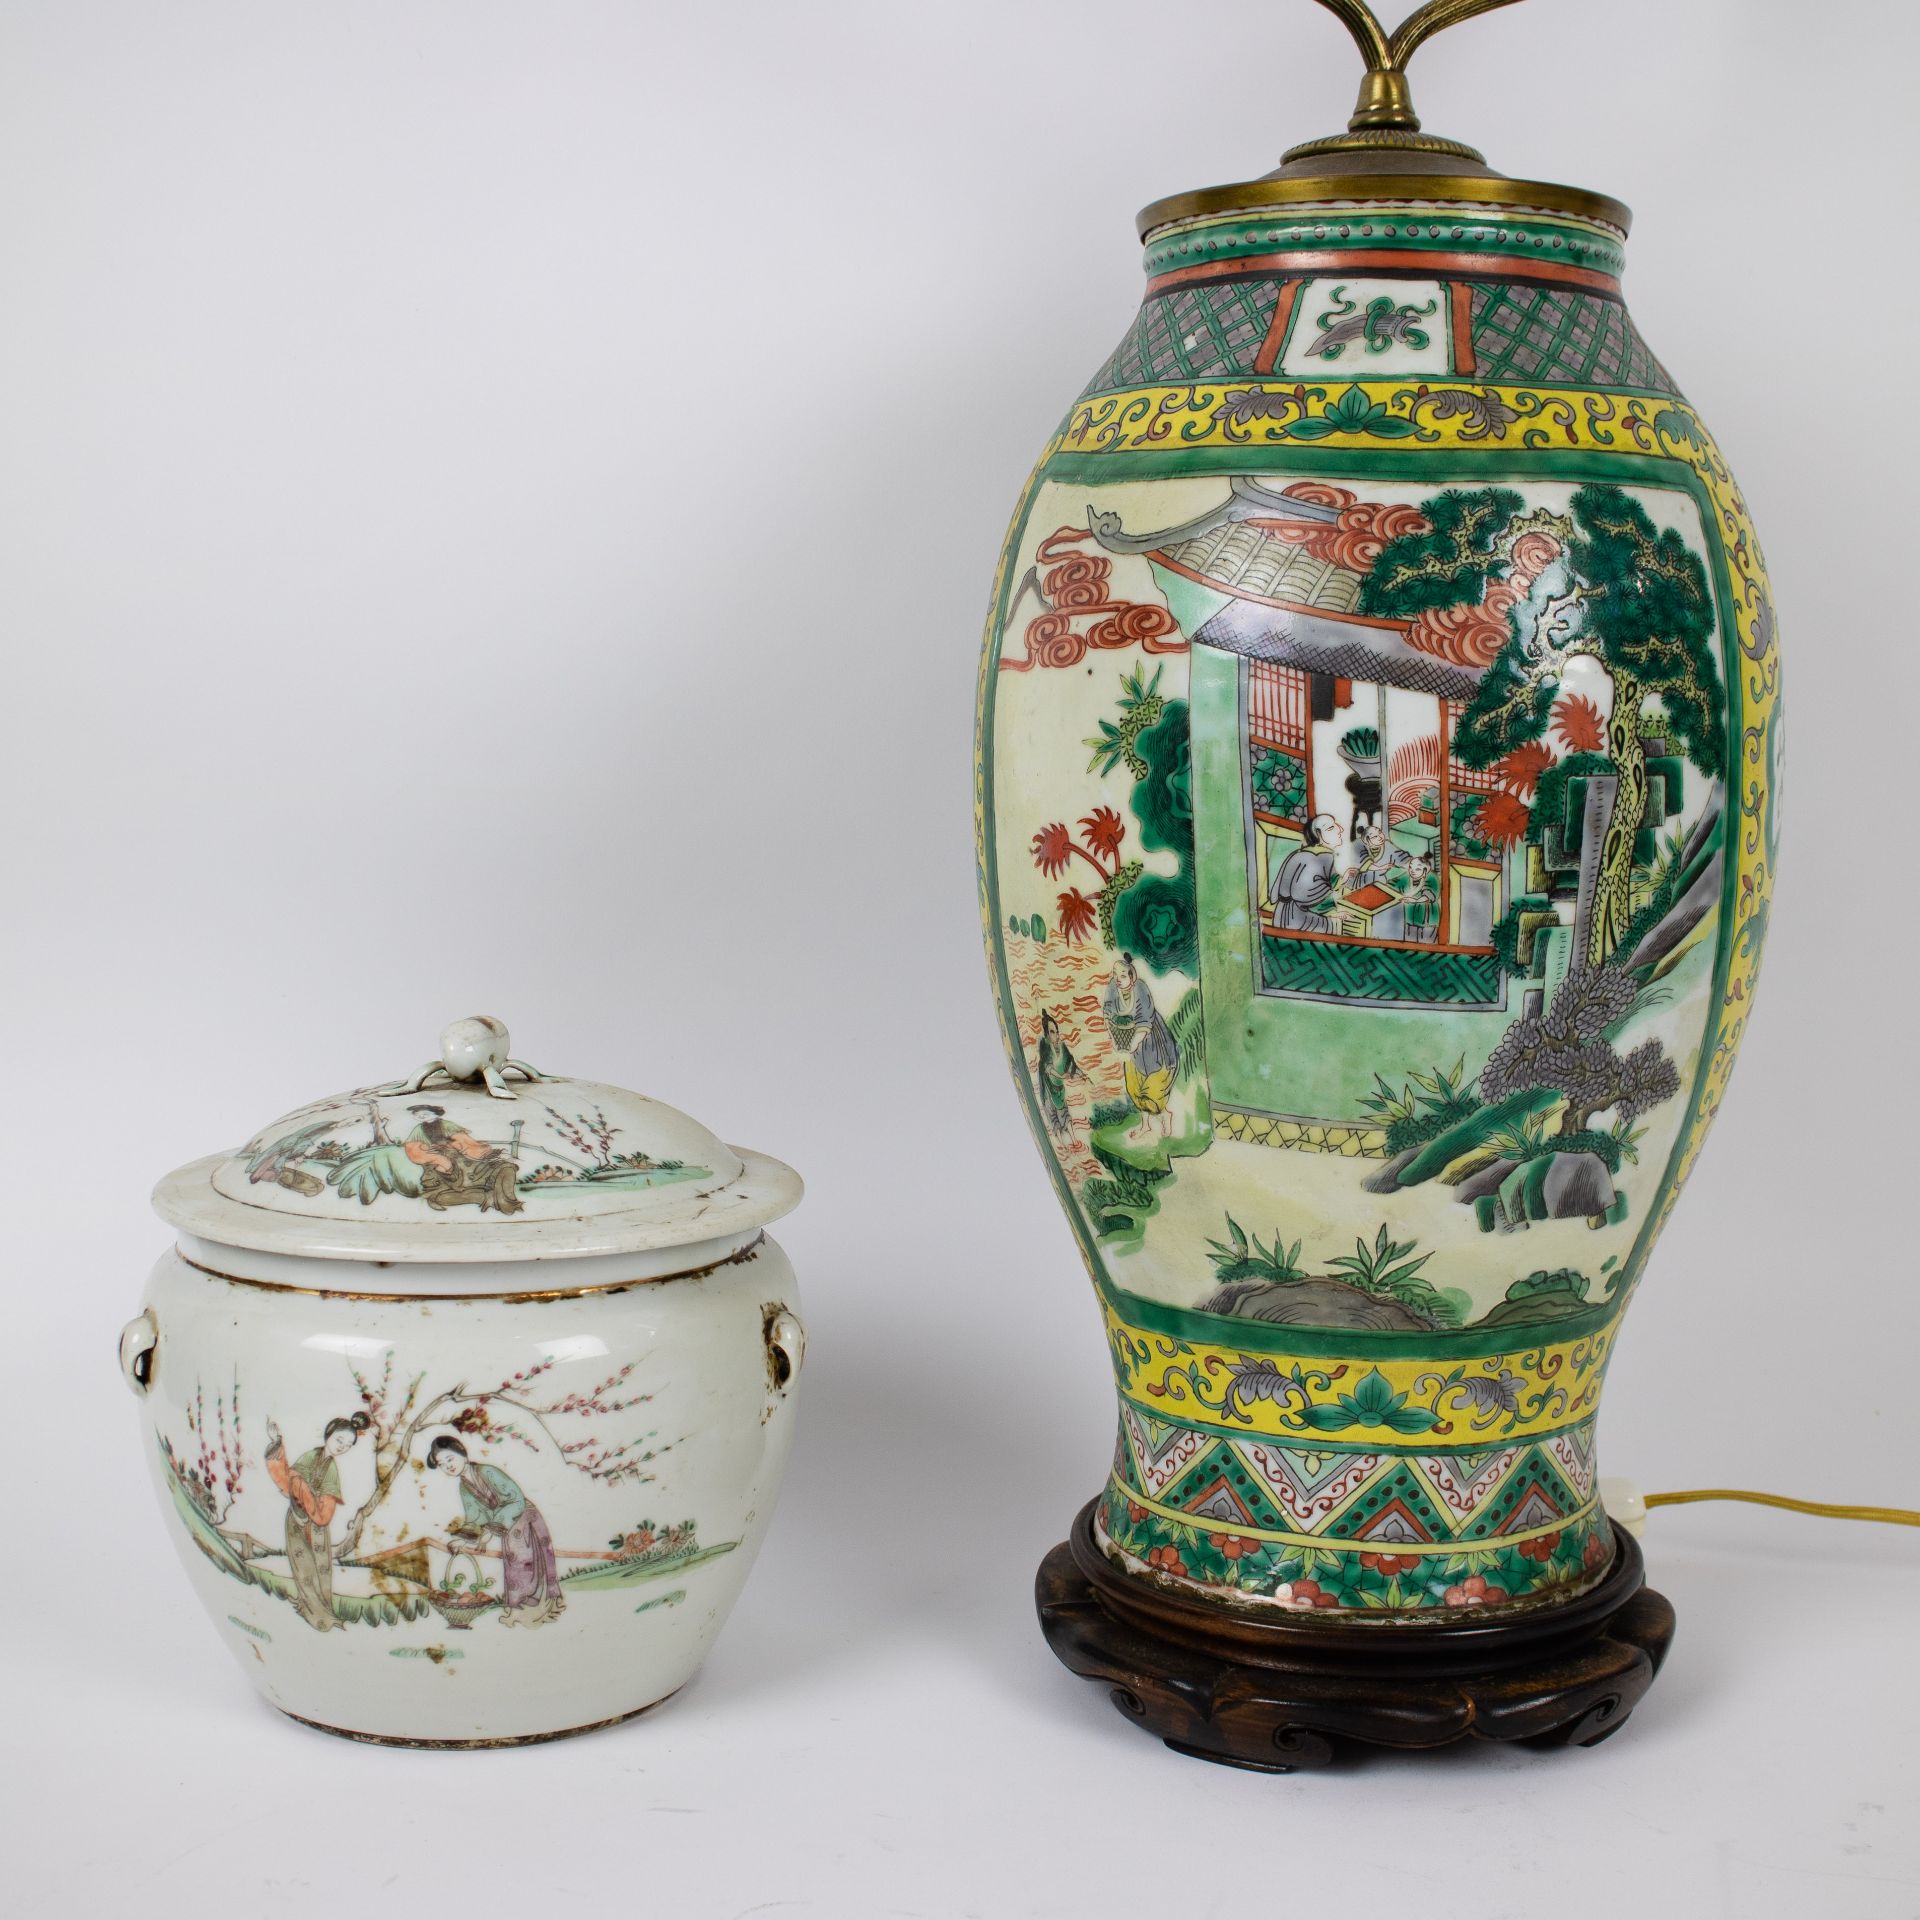 A Chinese storage jar and a famille verte vase